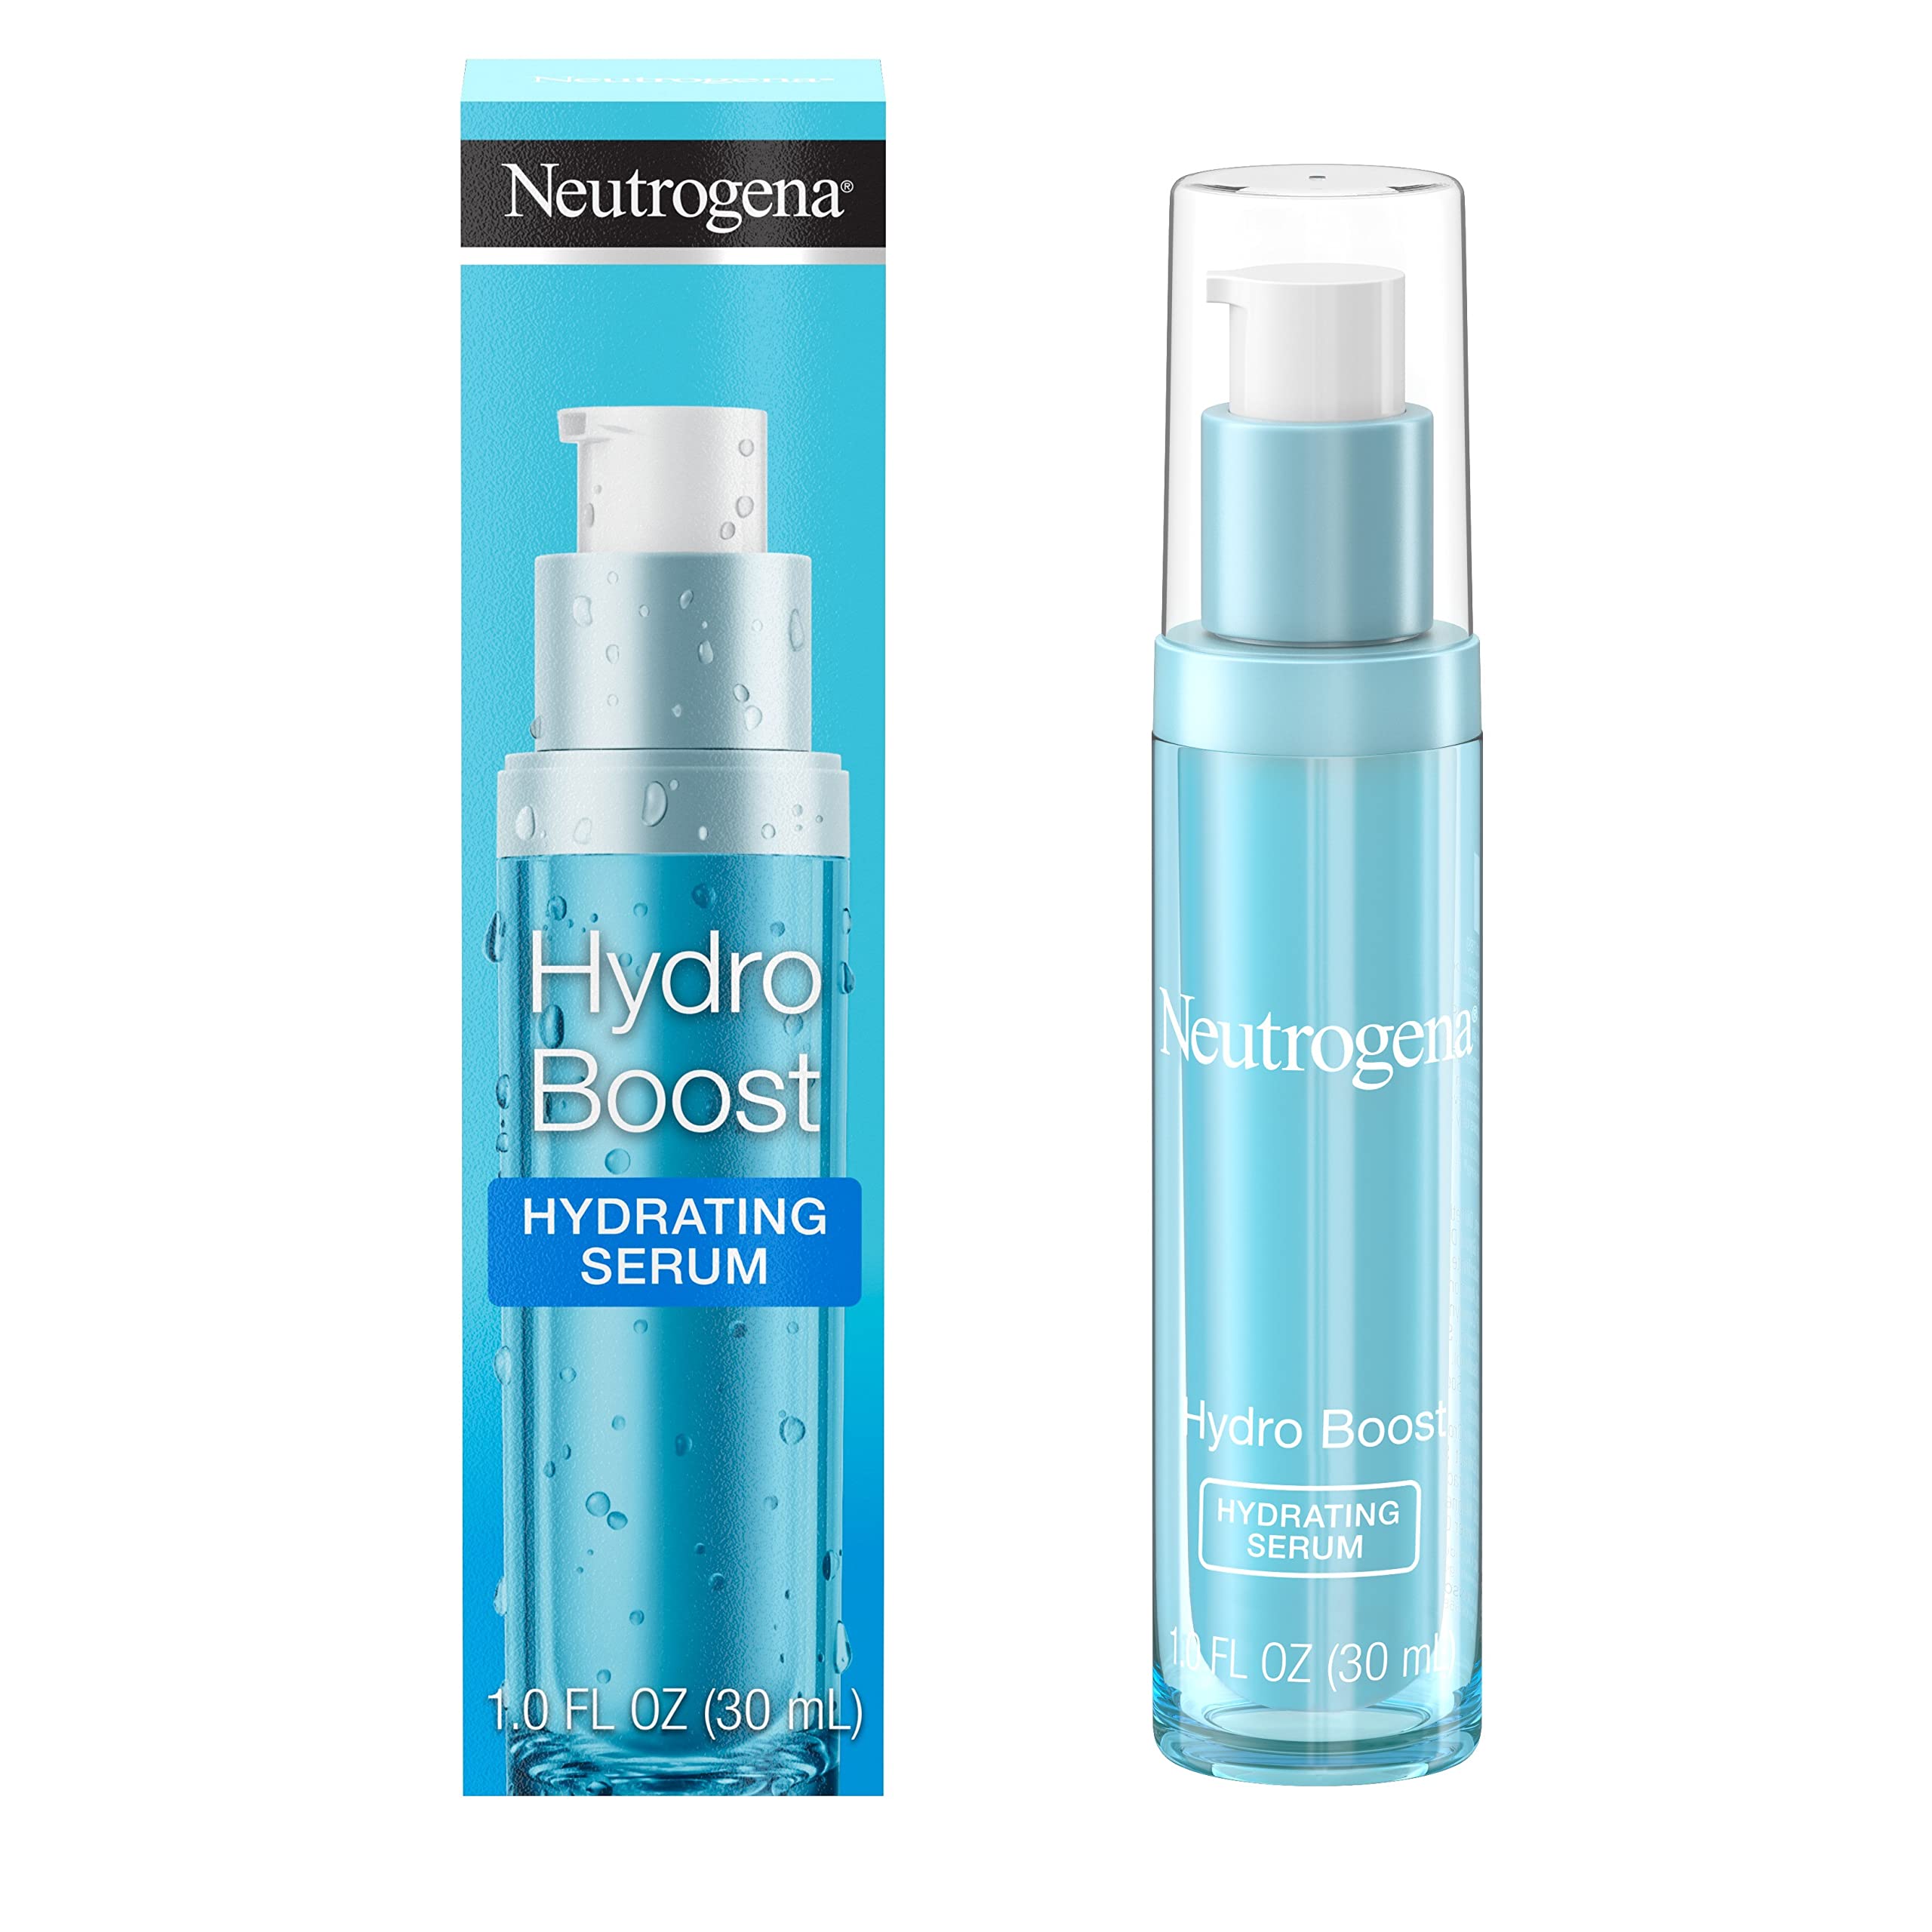 1-Oz Neutrogena Hydro Boost Hydrating Hyaluronic Acid Face Serum (Oil-Free) $9.74 w/ S&S + Free Shipping w/ Prime or on $35+